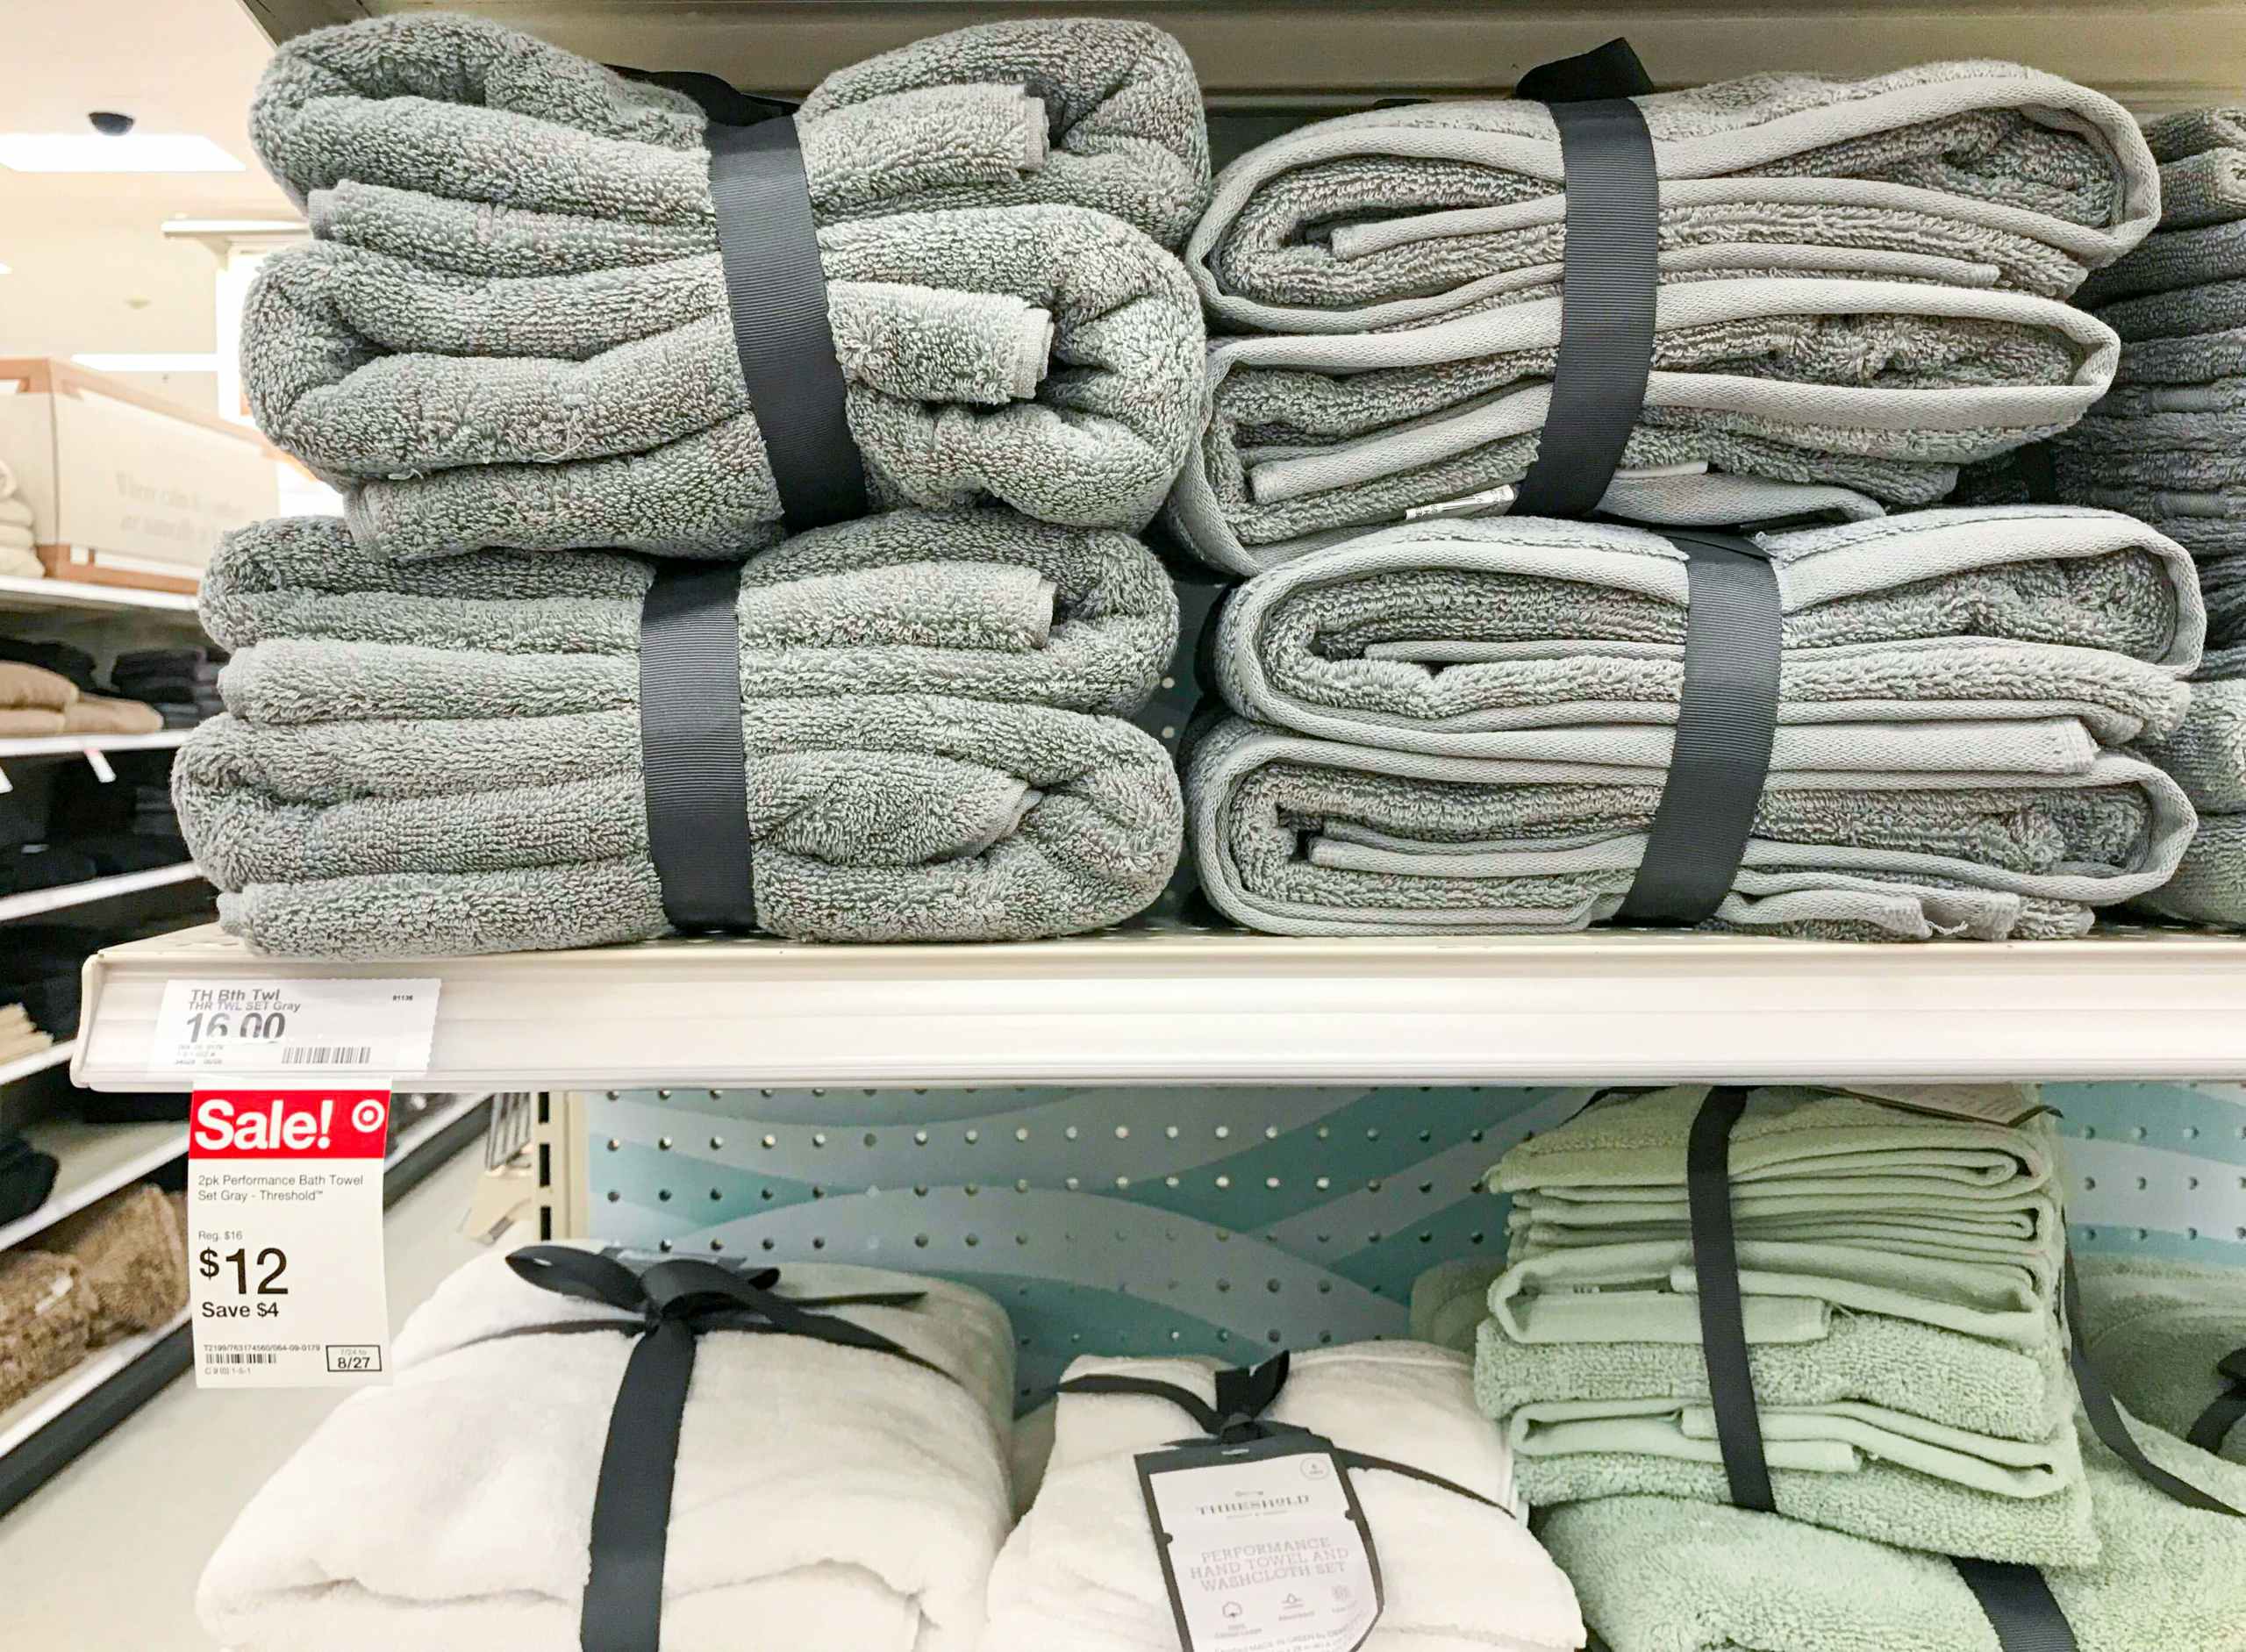 Multiple Threshold towel sets on Target shelf with sale price tag showing